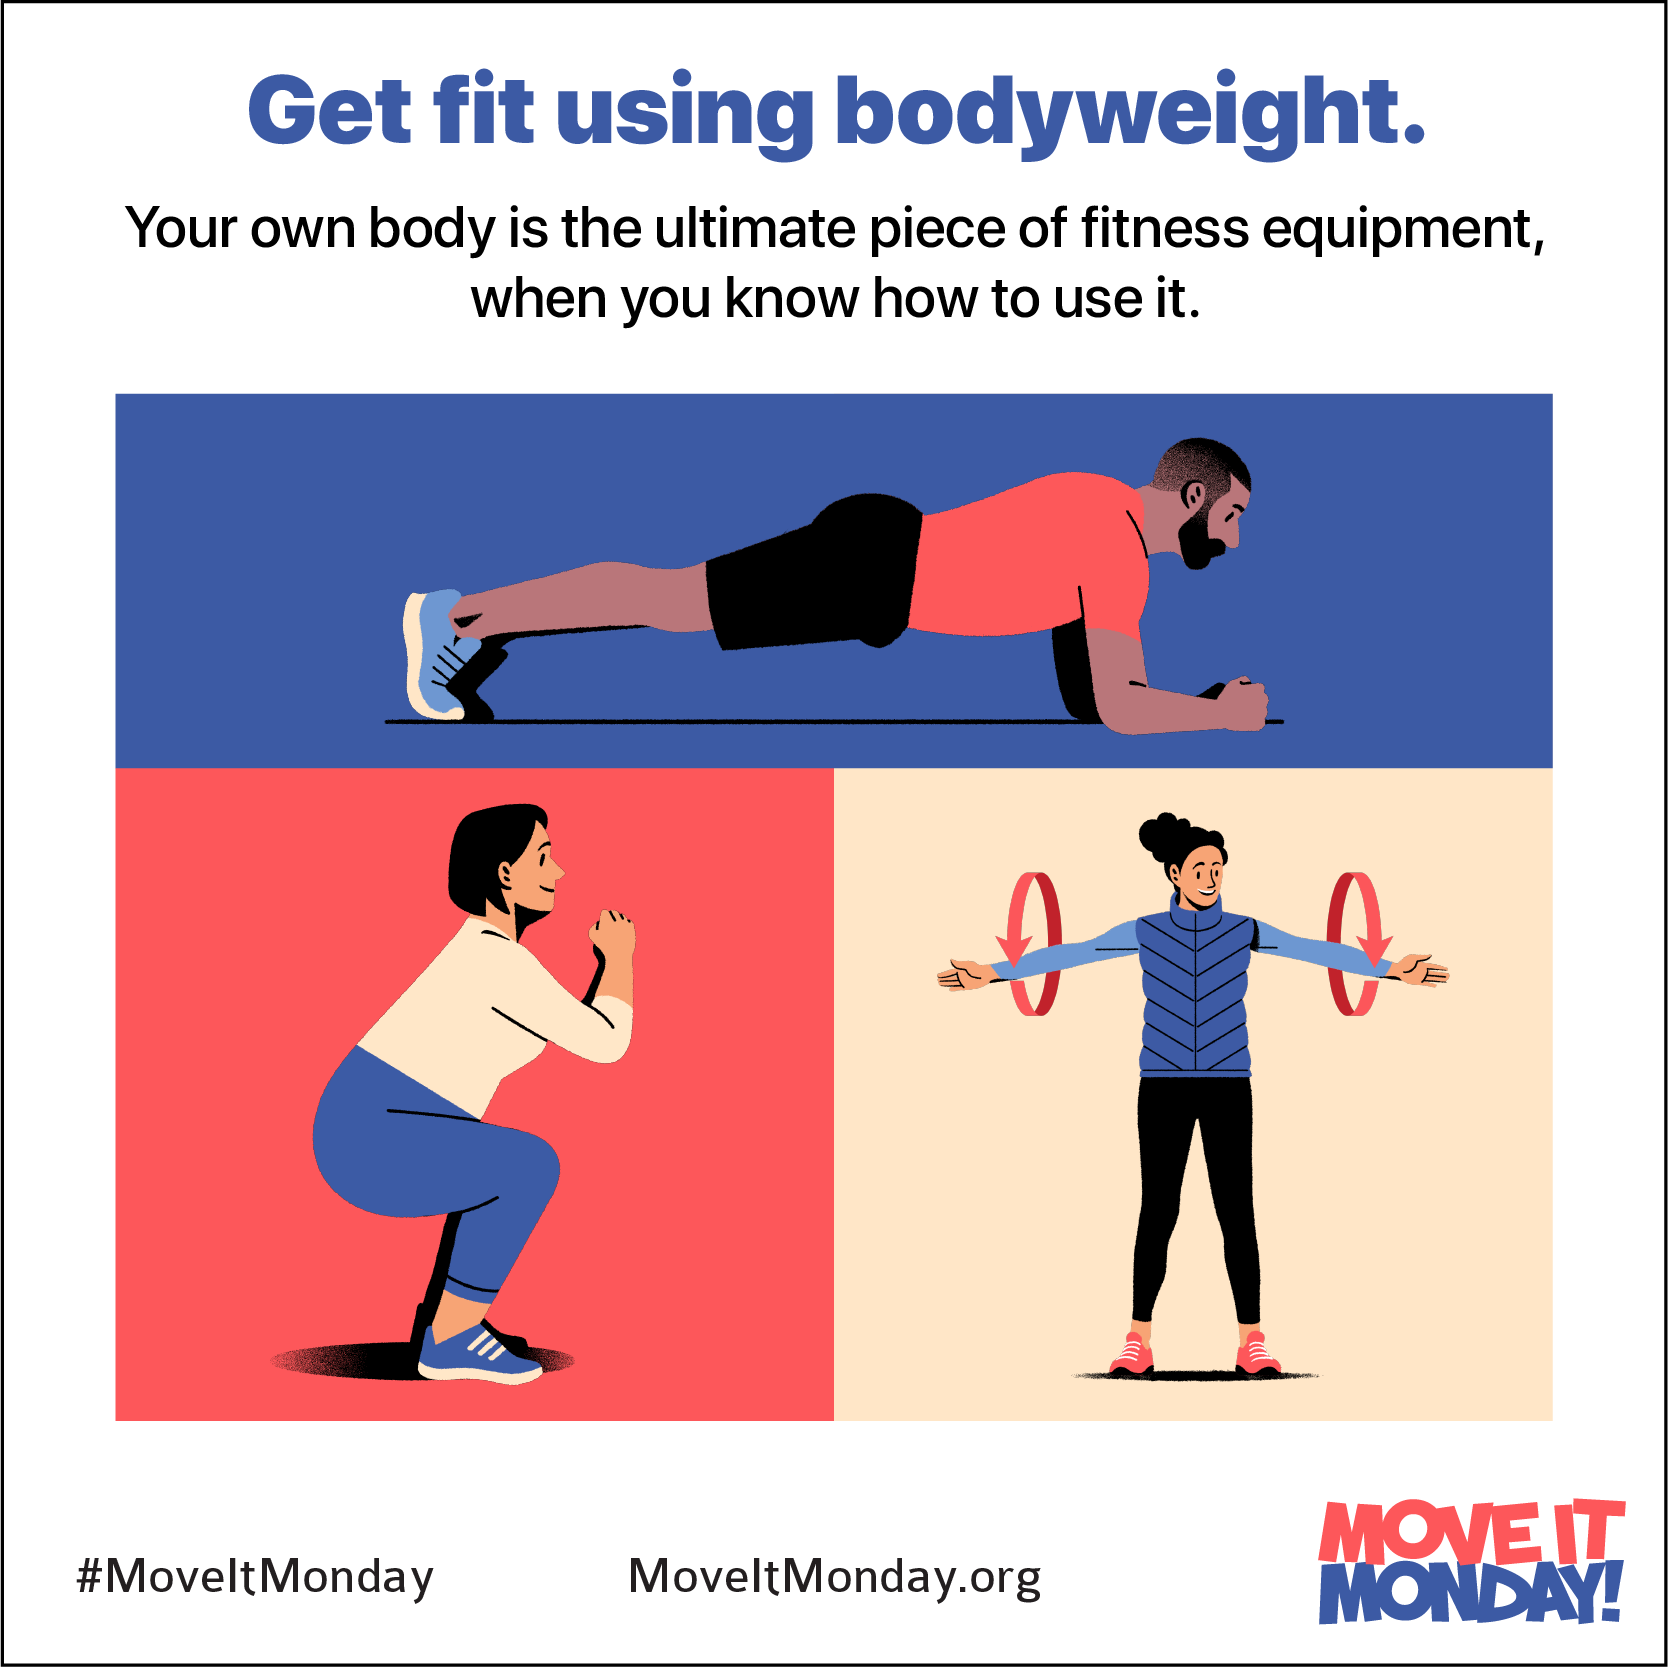 Get fit using bodyweight. Your own body is the ultimate piece of fitness equipment, when you know how to use it.